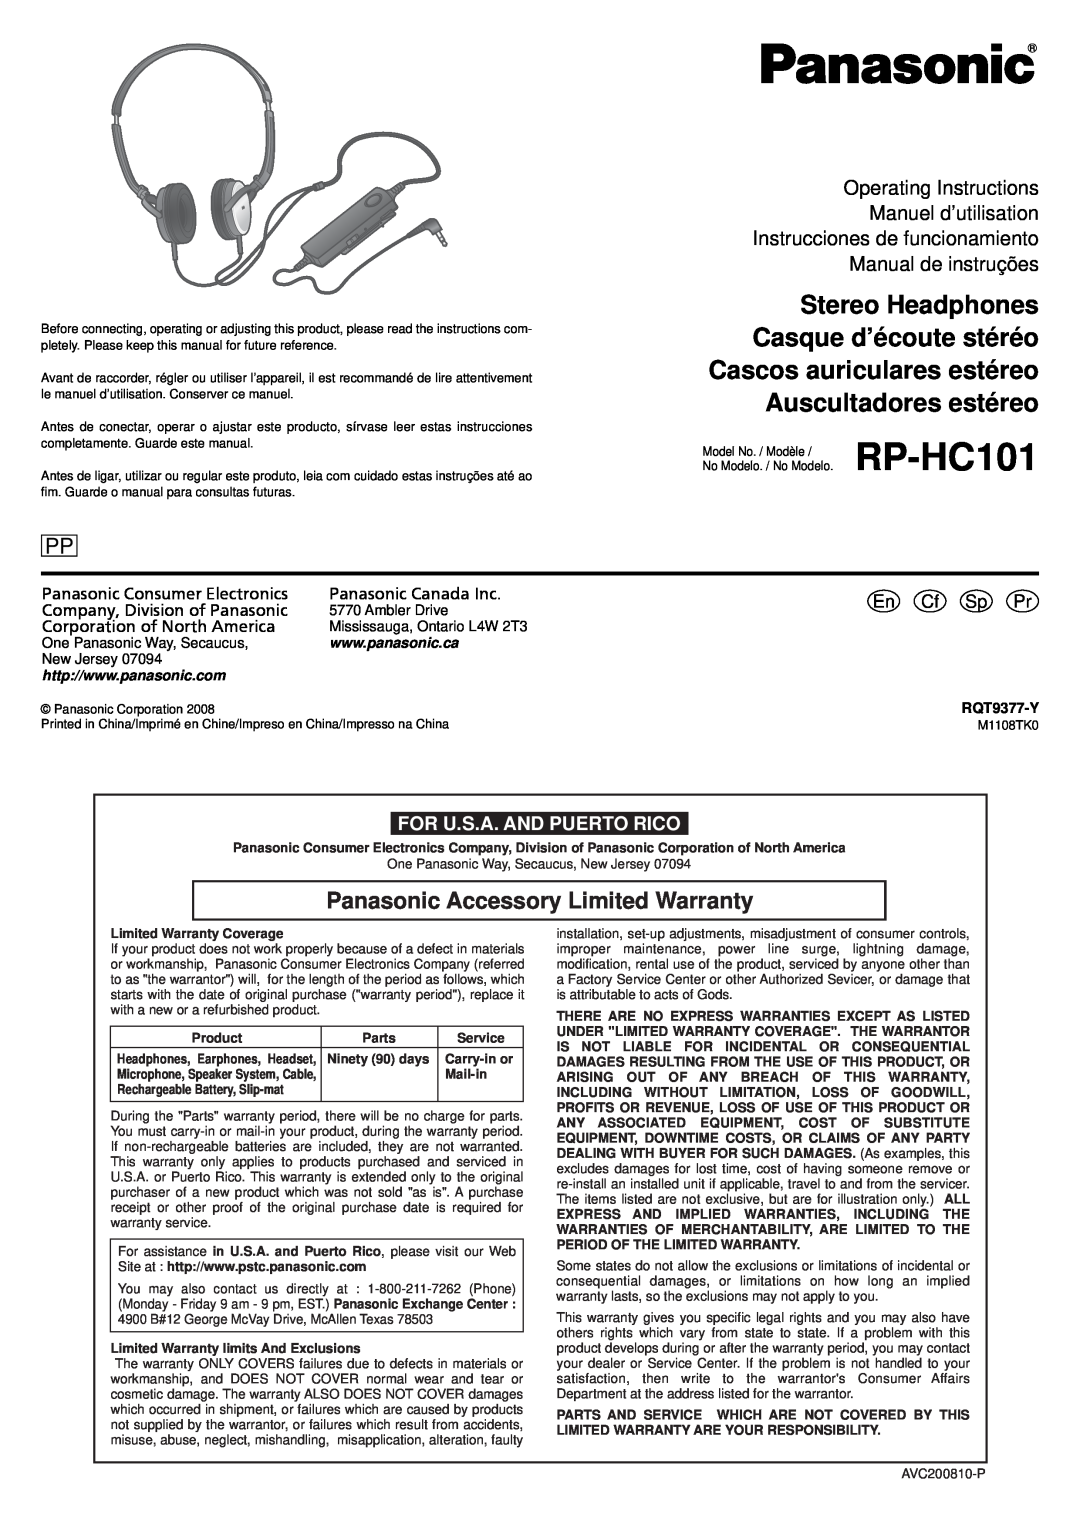 Panasonic RP HC101 operating instructions RP-HC101, Panasonic Accessory Limited Warranty, For U.S.A. And Puerto Rico 